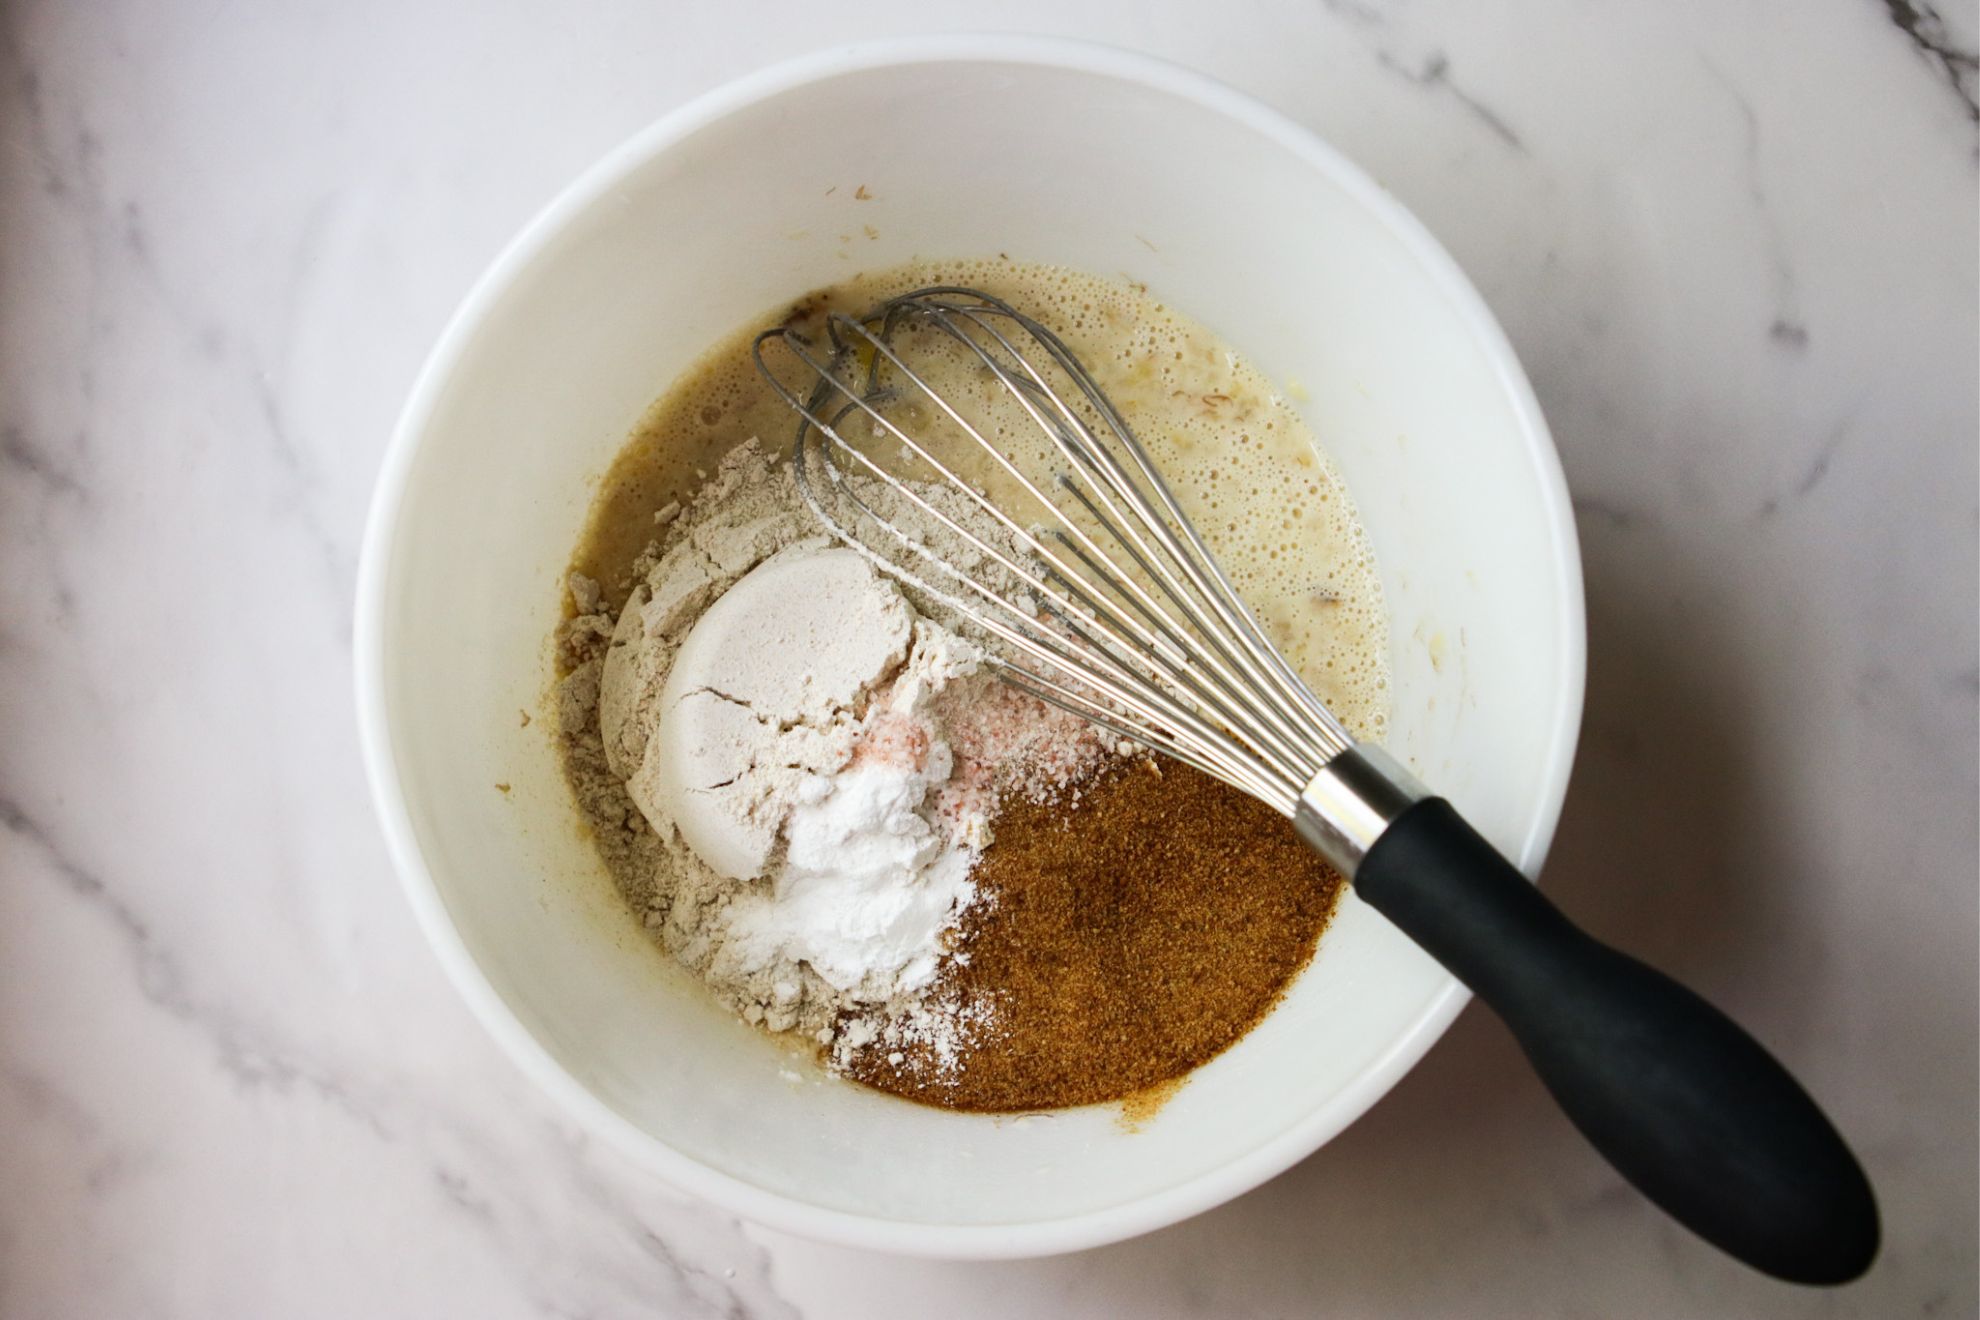 This is an overhead horizontal image of wet ingredients with dry ingredients on top. The ingredients are in a white bowl on a marble counter. A whisk with a black handle is in the bowl with the black handle leaning against the side pointing to the bottom right of the image.